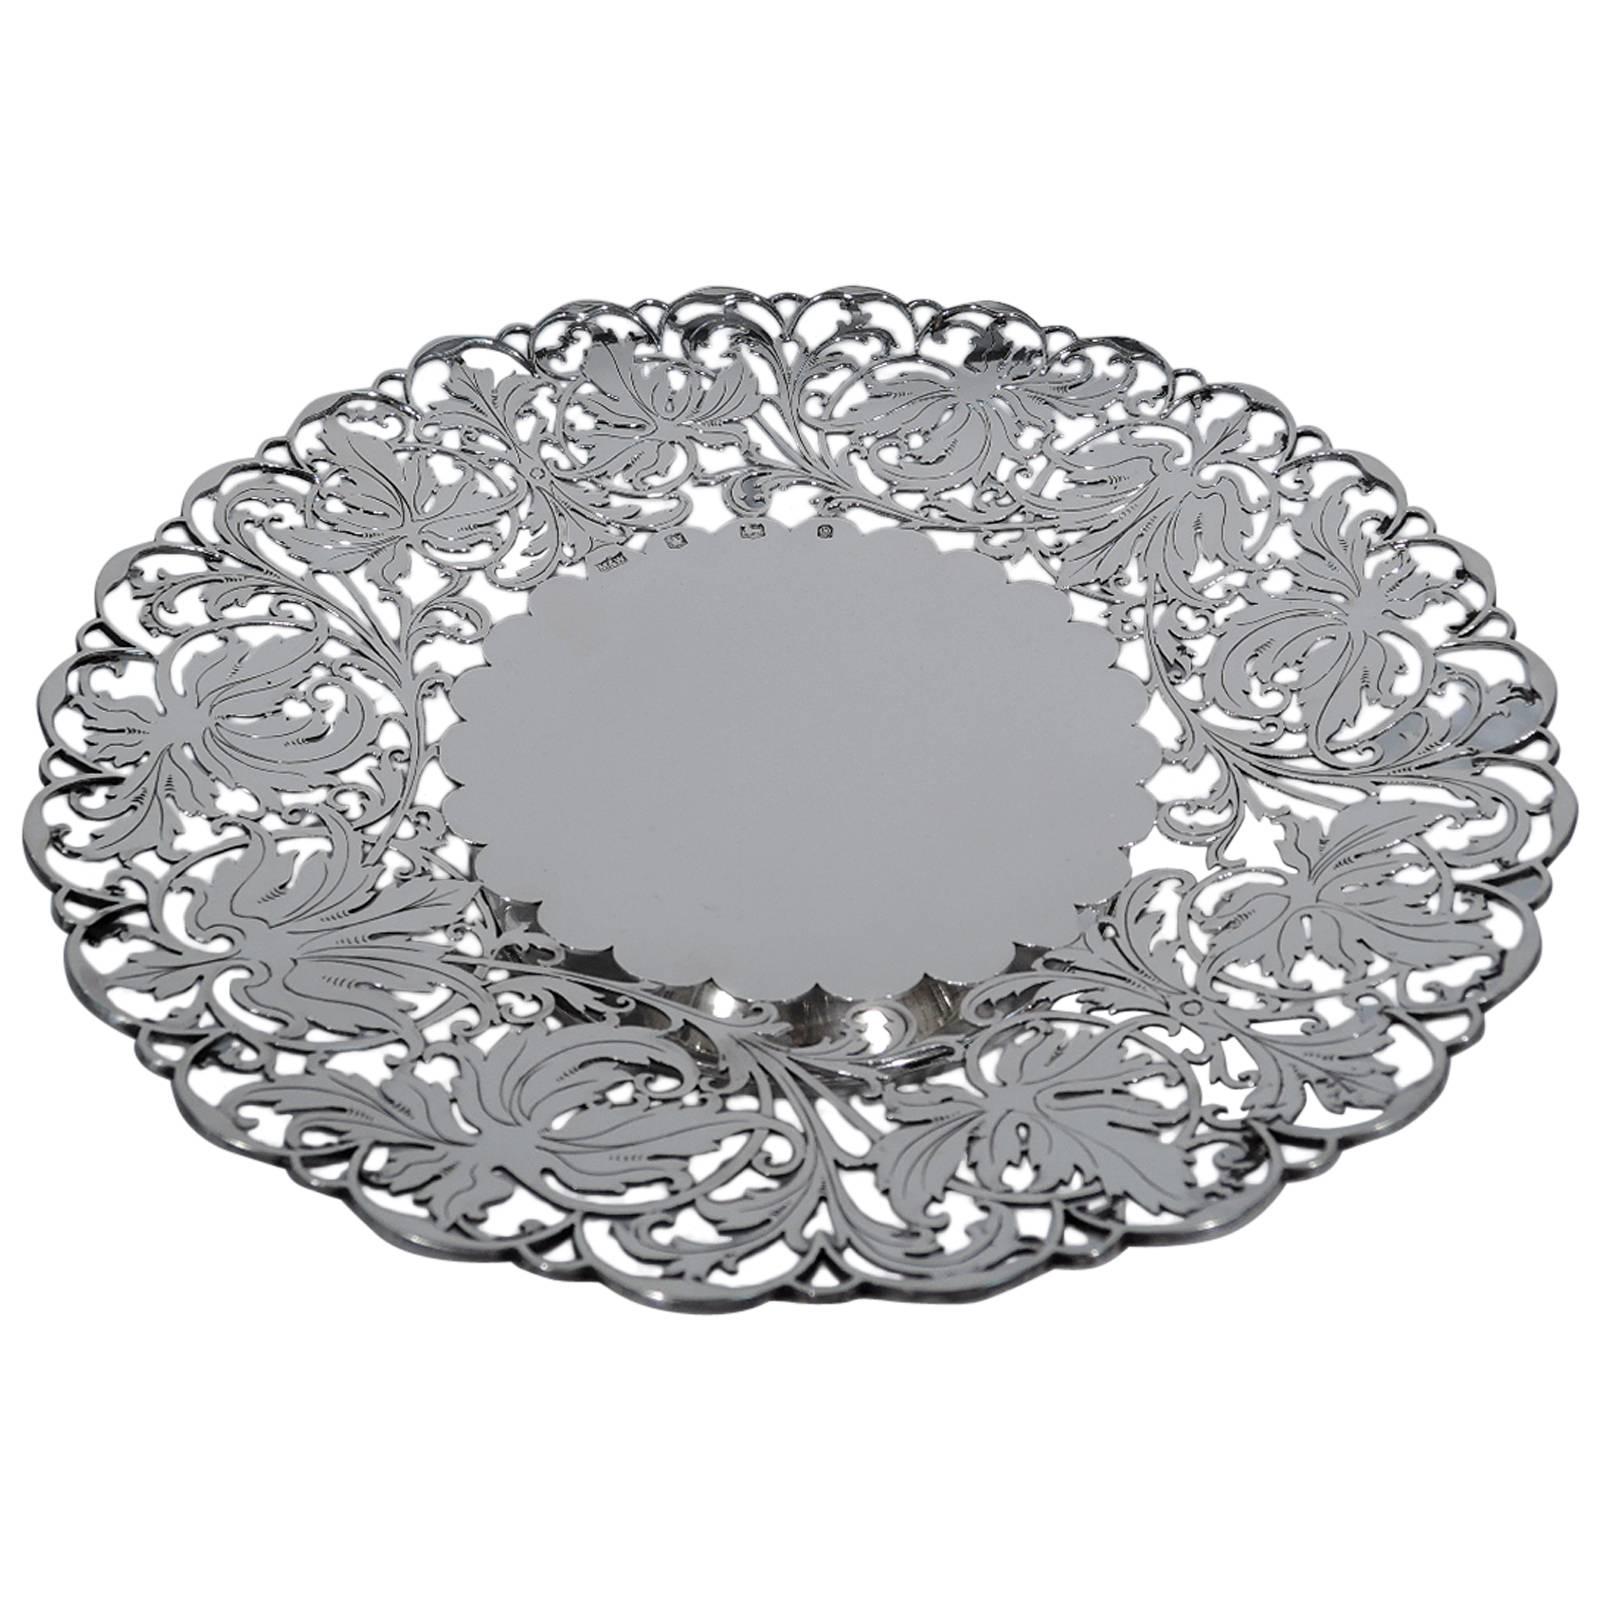 Old Fashioned English Sterling Silver Cake Plate